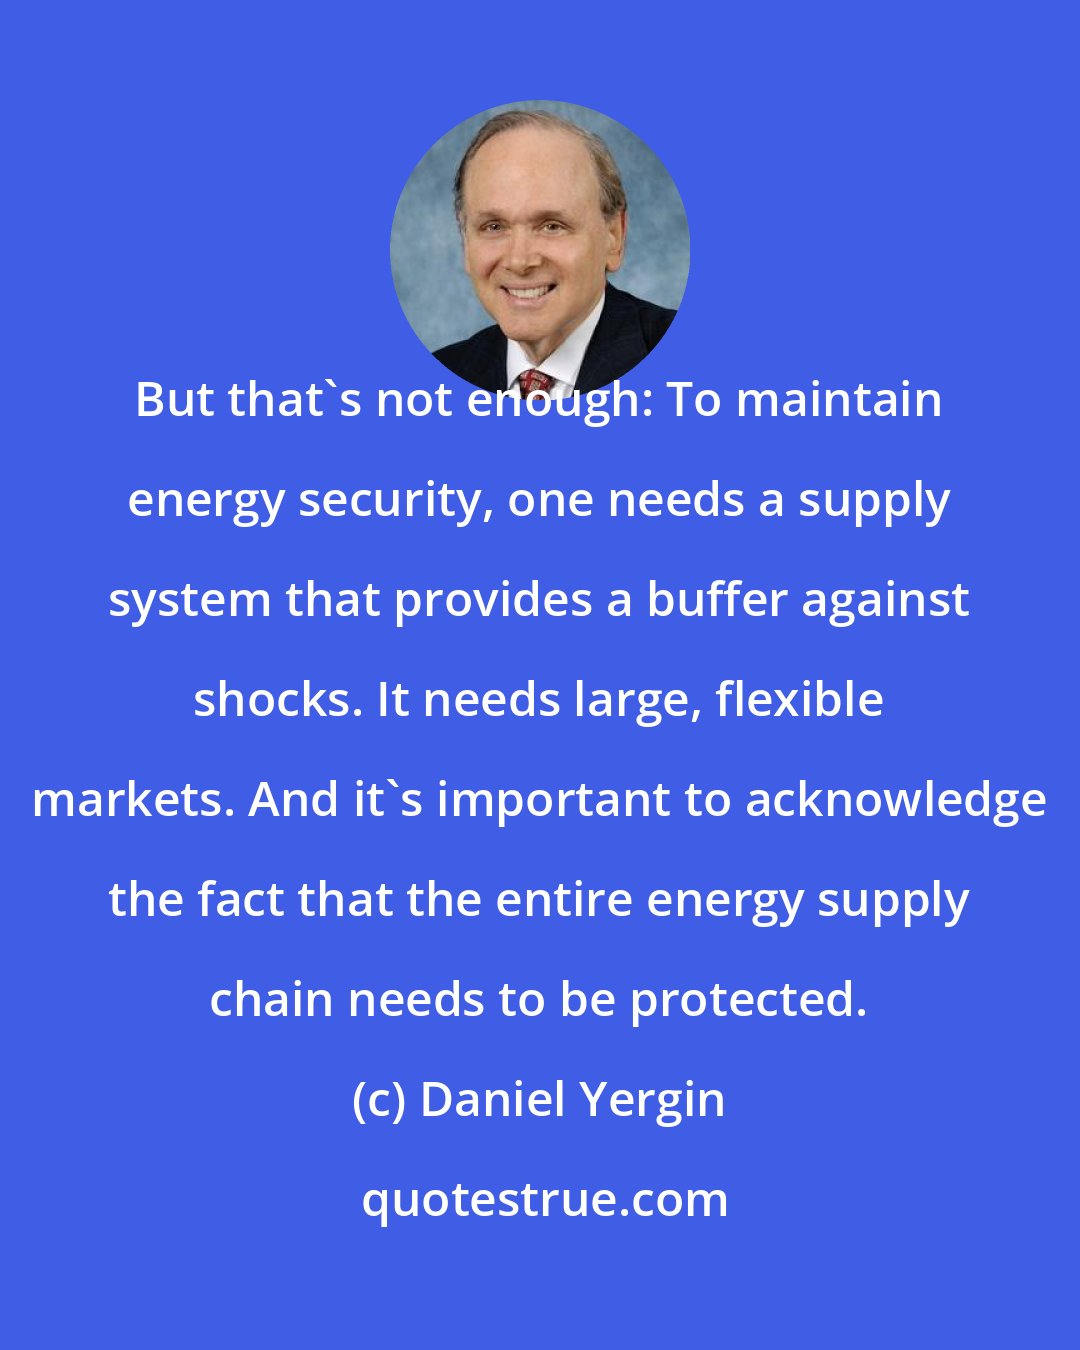 Daniel Yergin: But that's not enough: To maintain energy security, one needs a supply system that provides a buffer against shocks. It needs large, flexible markets. And it's important to acknowledge the fact that the entire energy supply chain needs to be protected.